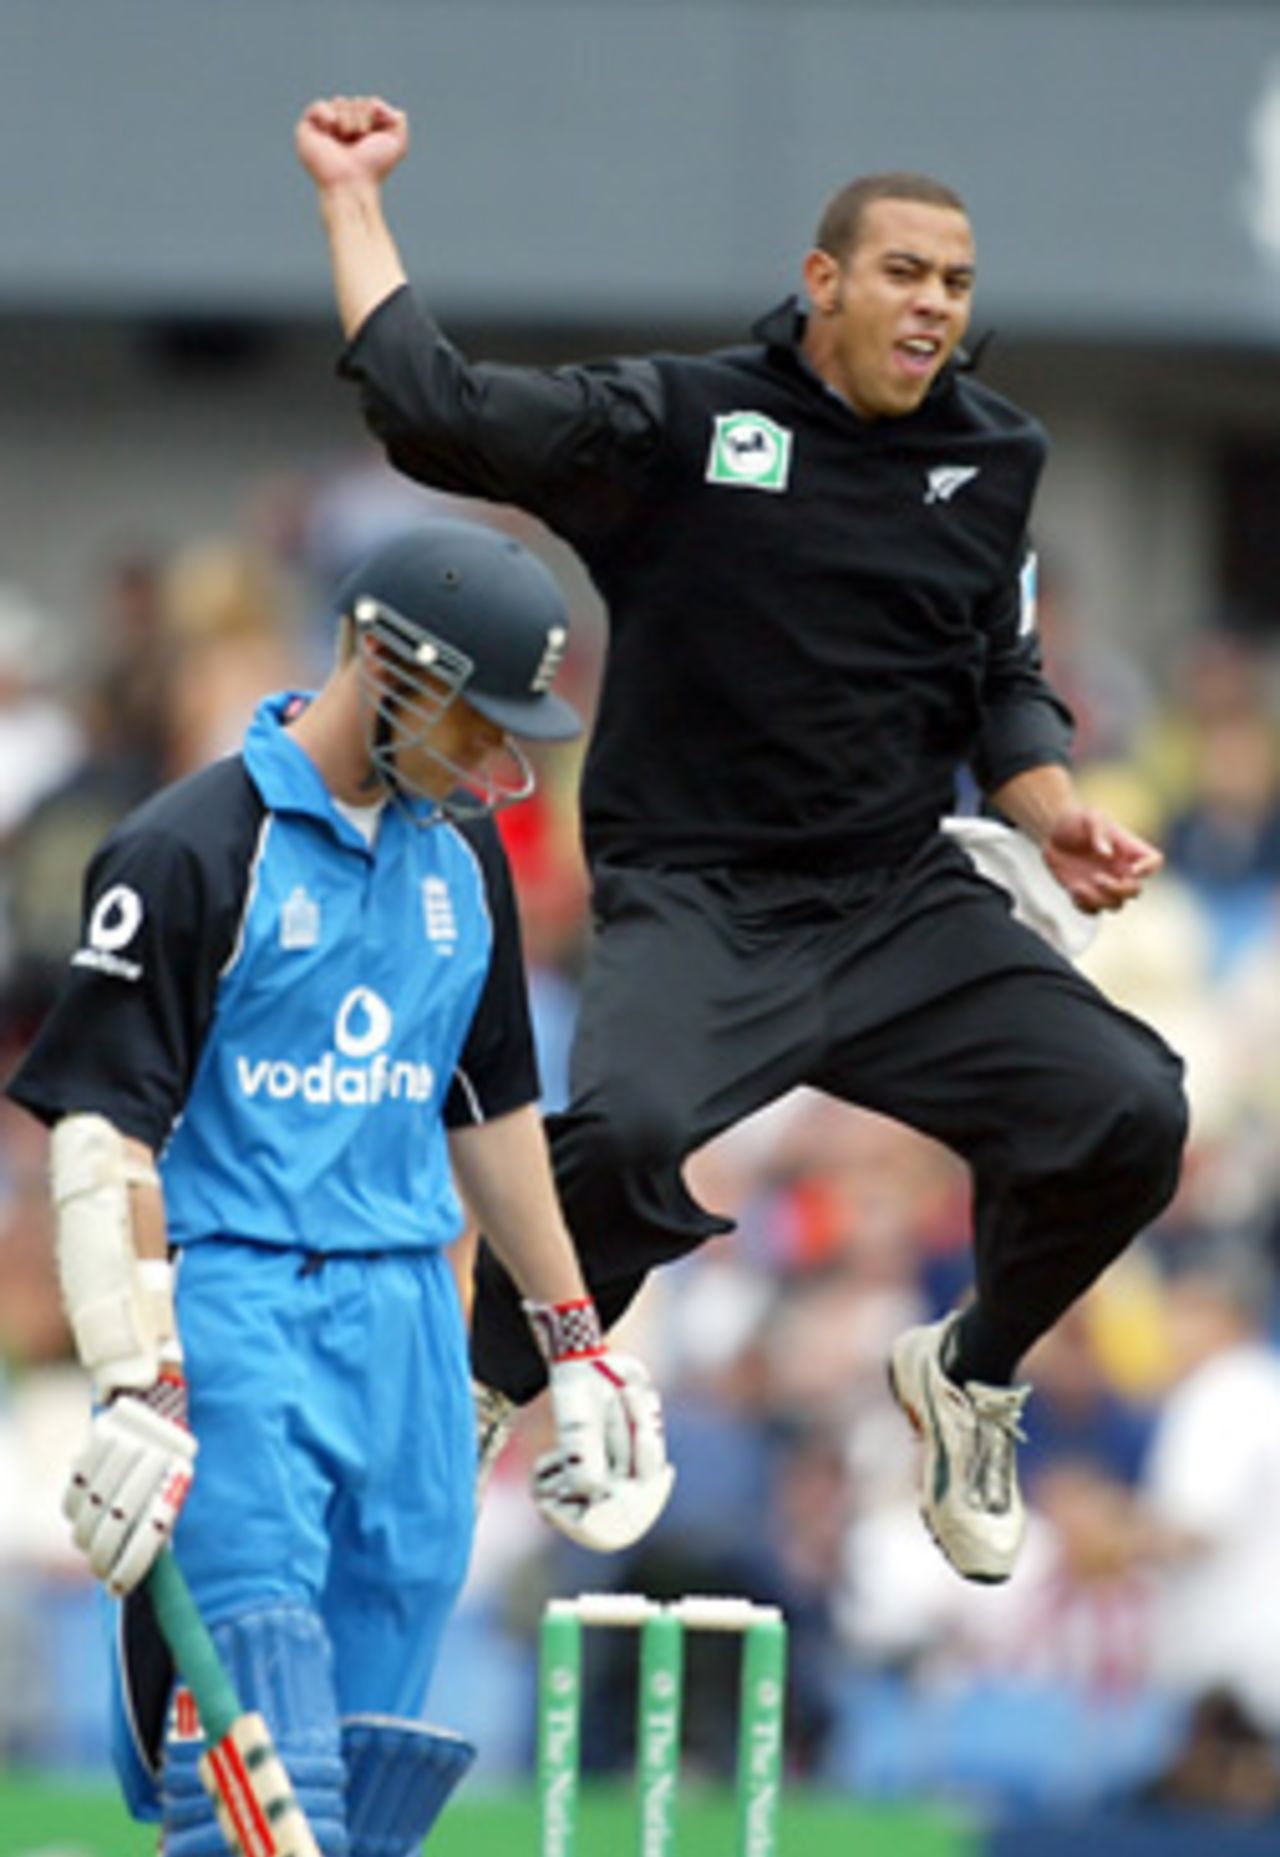 New Zealand bowler Andre Adams leaps to wrongly celebrate the dismissal of England batsman Nick Knight. Umpire Doug Cowie turned down the appeal for caught behind. 4th ODI: New Zealand v England at Eden Park, Auckland, 23 February 2002.